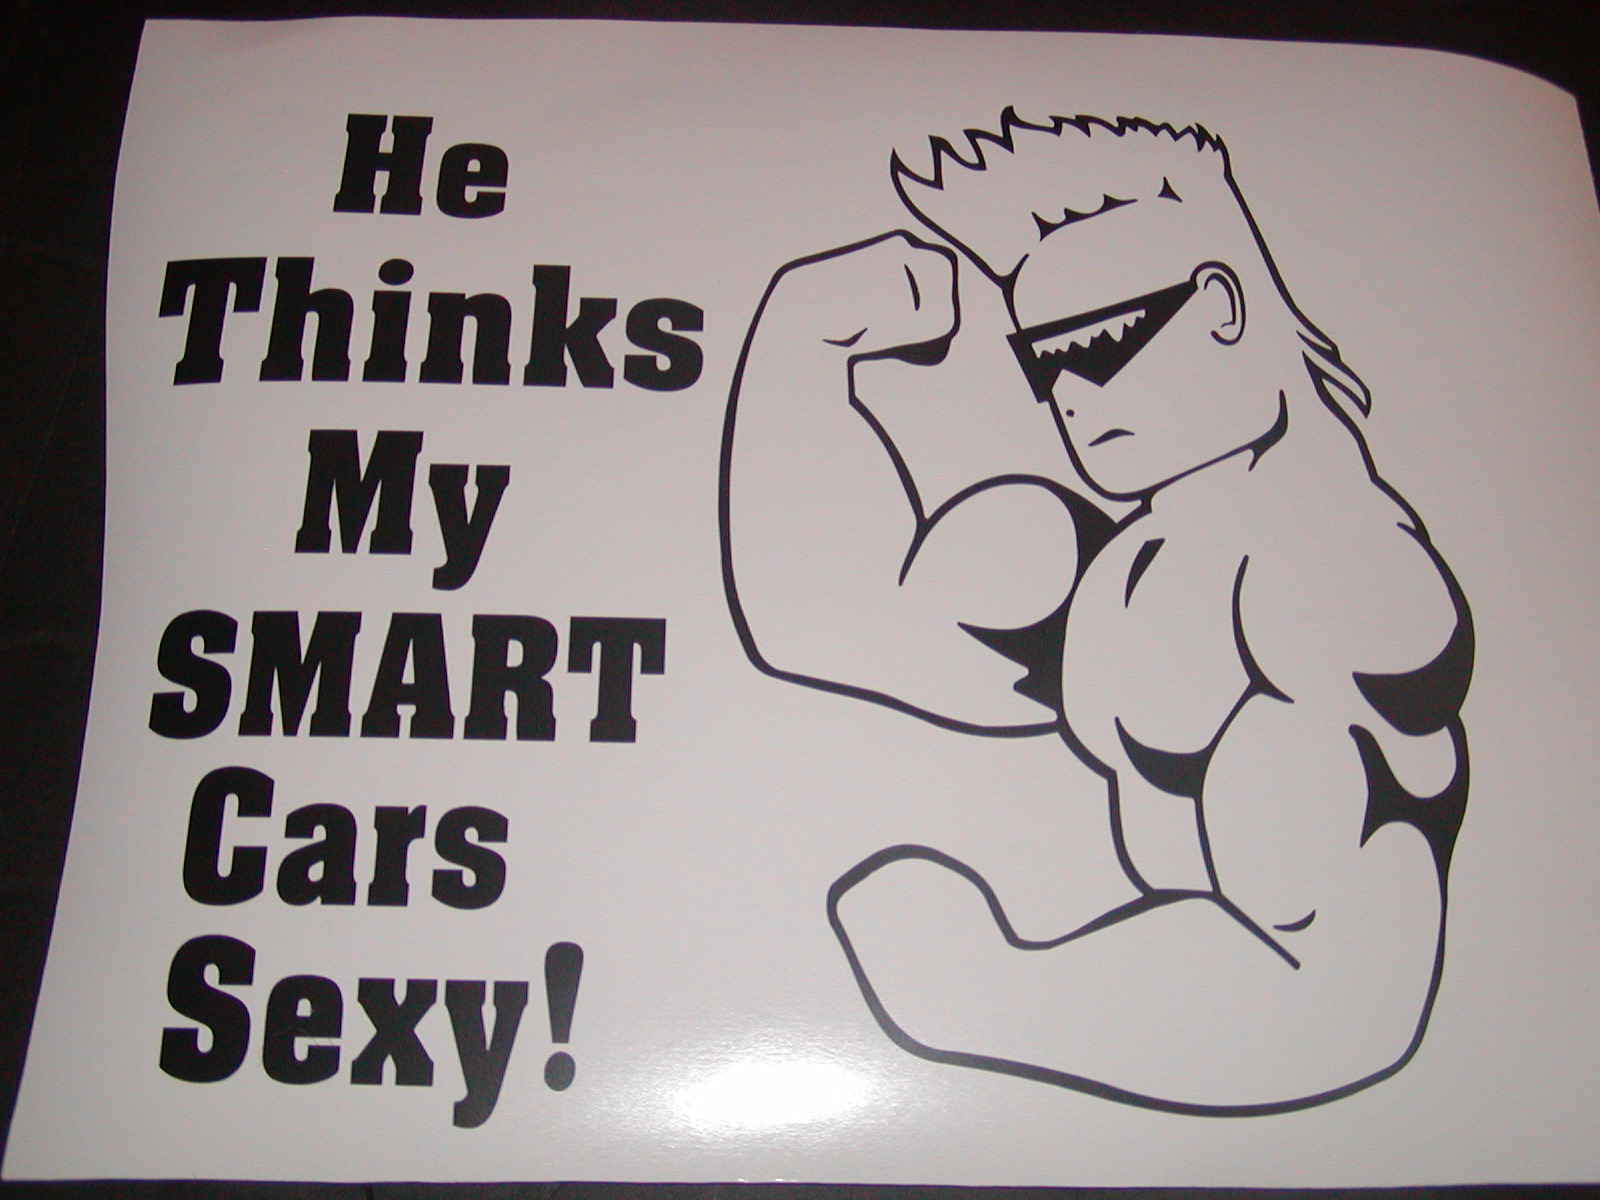 He thinks My Smart Car is Sexy Decal